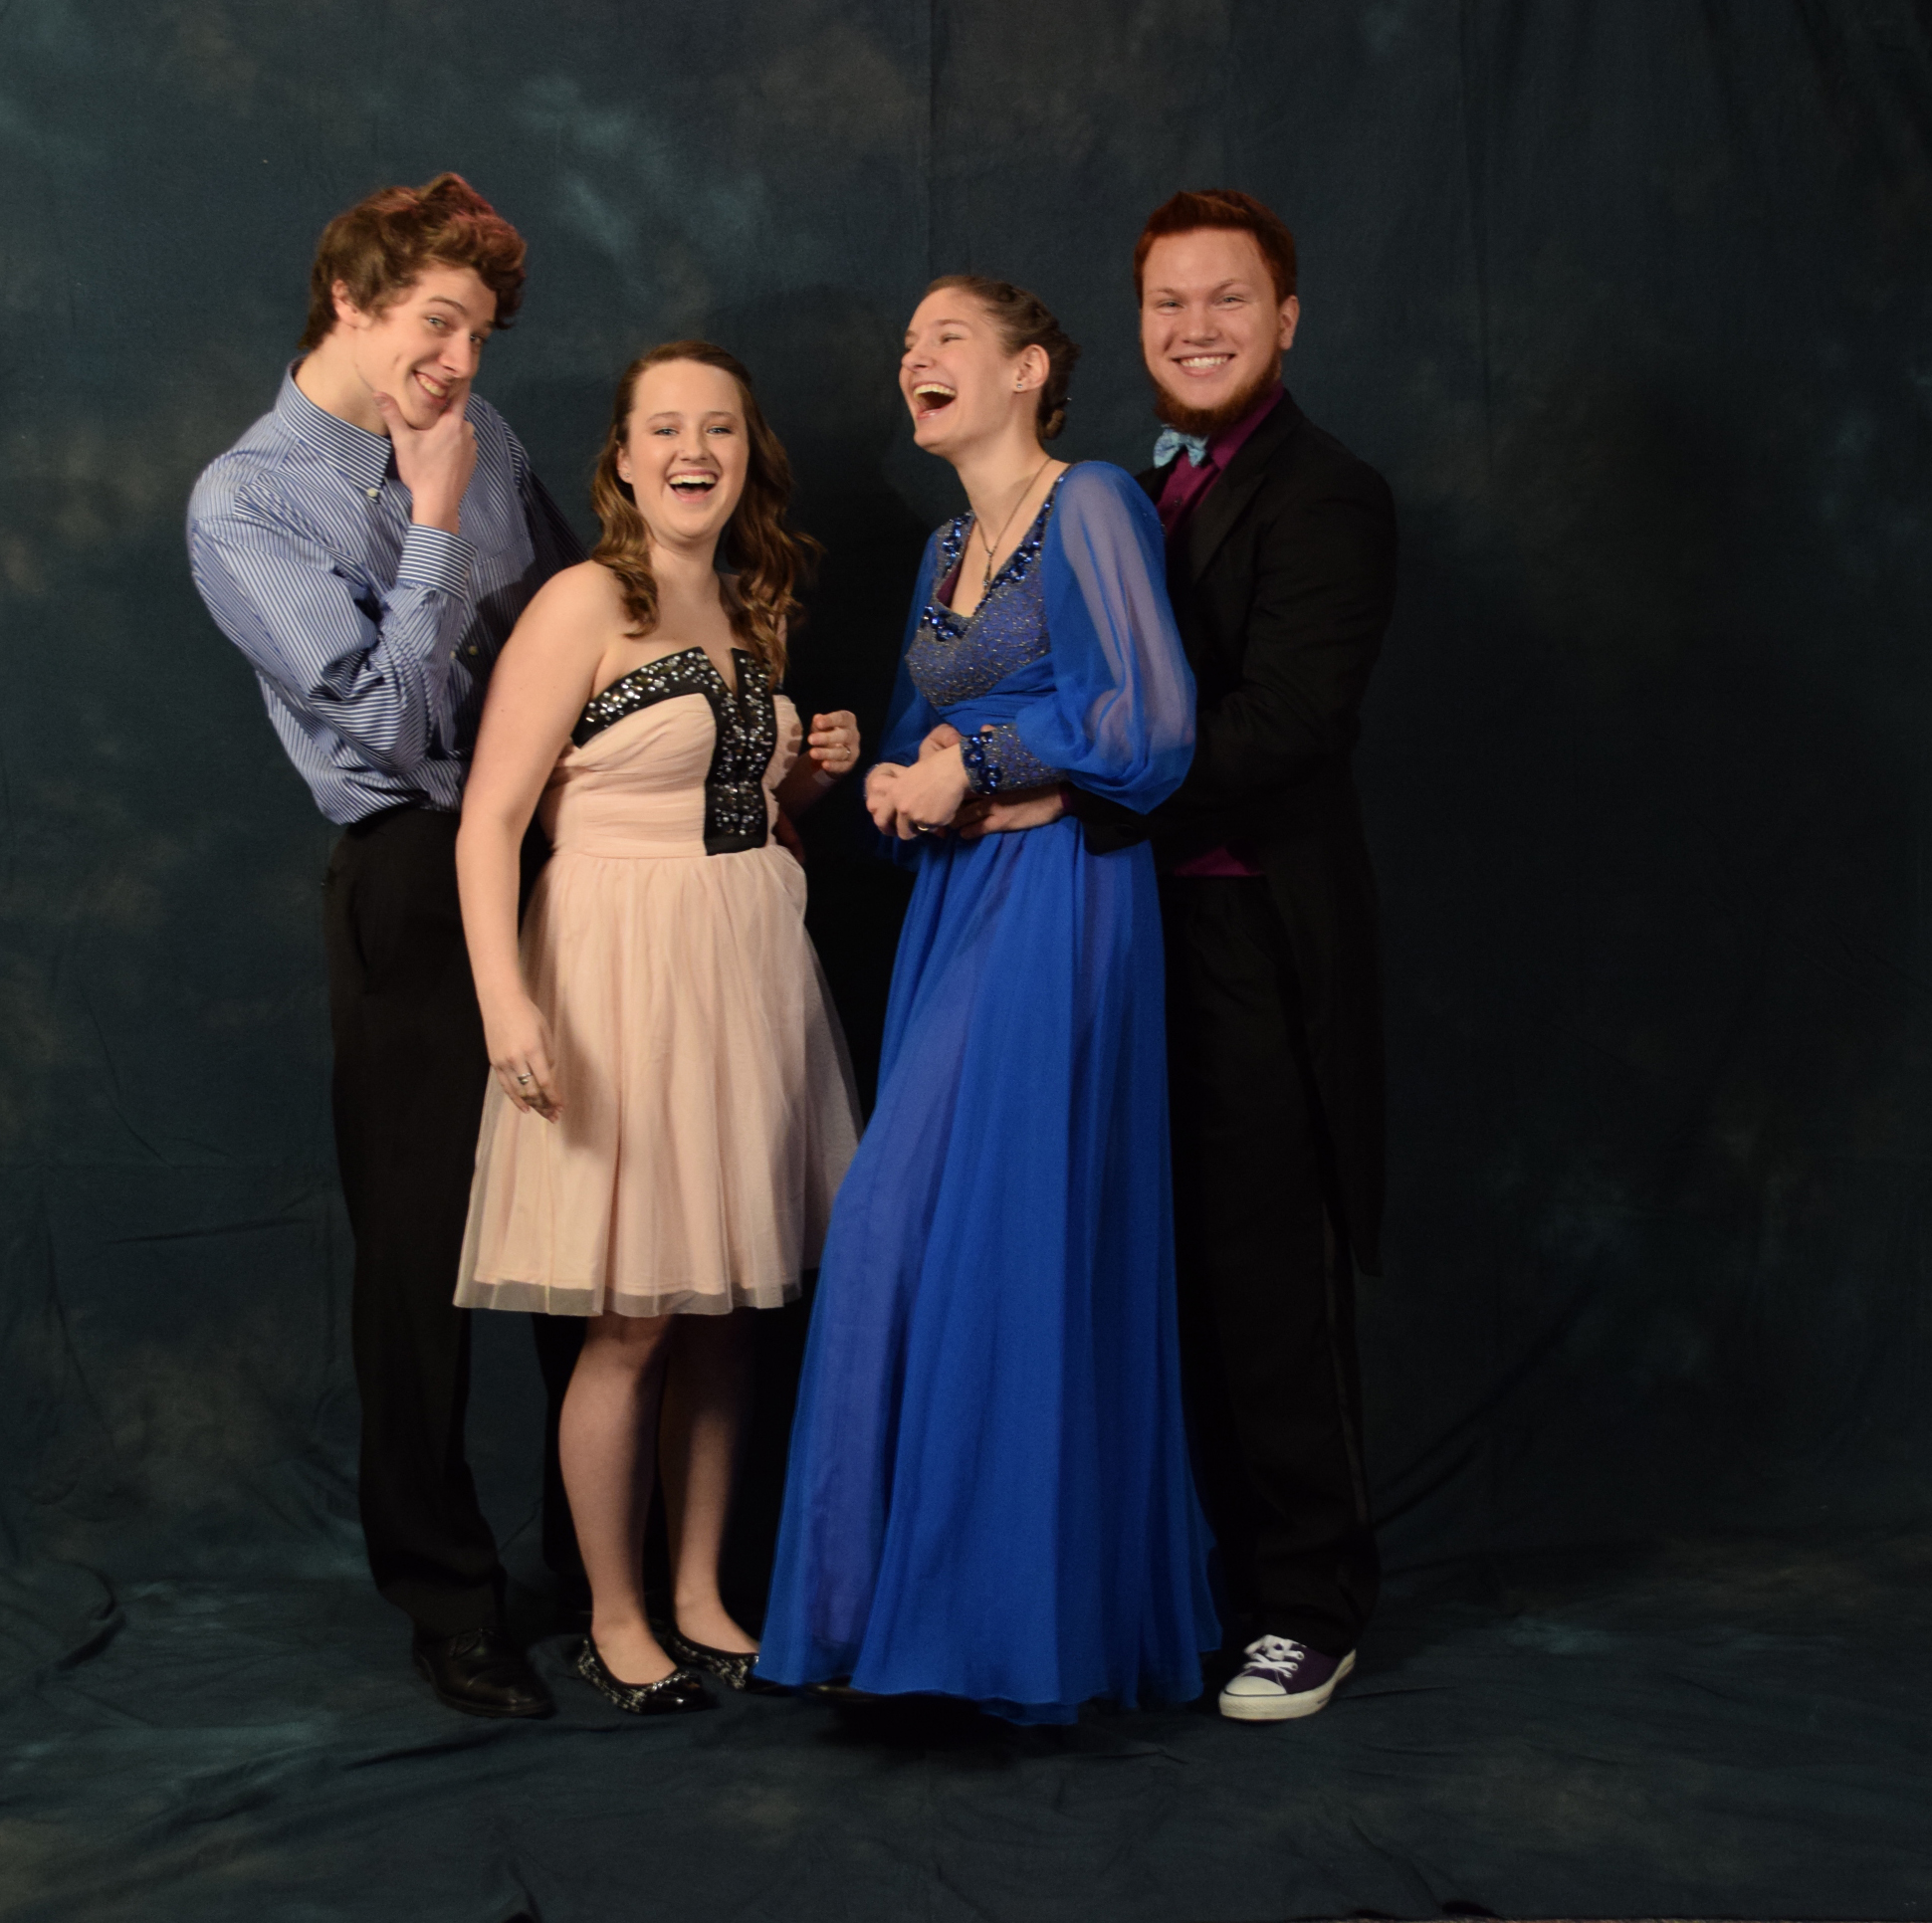 Riley Cummins, Mikala McKim, Emily Zahasky and Quinn Zahasky.  Emily got her blue dress from an antique store in Iowa for $30, "It fit me like a glove." Quinn's purple Converse matched his purple shirt.  (Photo by Skip Gray/KTOO)